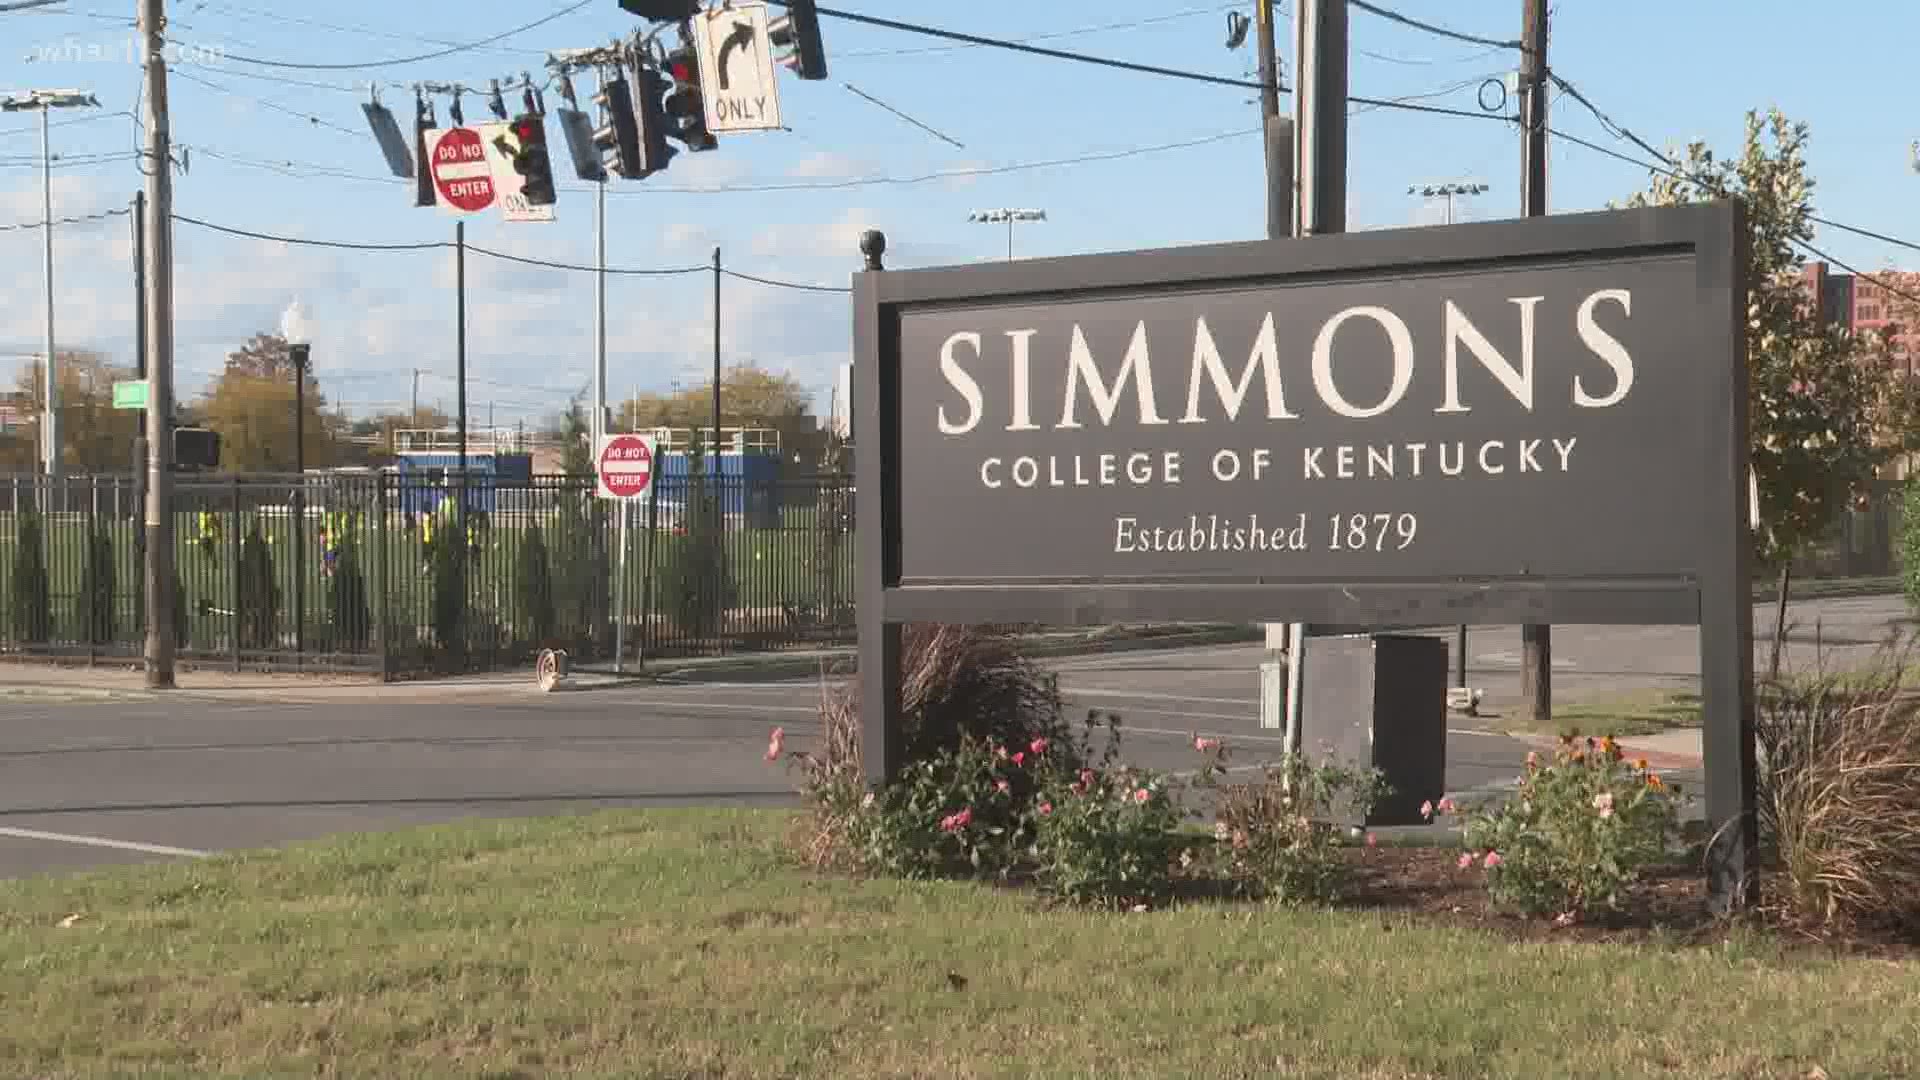 Gov. Andy Beshear signed State Bill 270, creating a portal between Simmons College and Kentucky State University, clearing the way for certifying teachers.